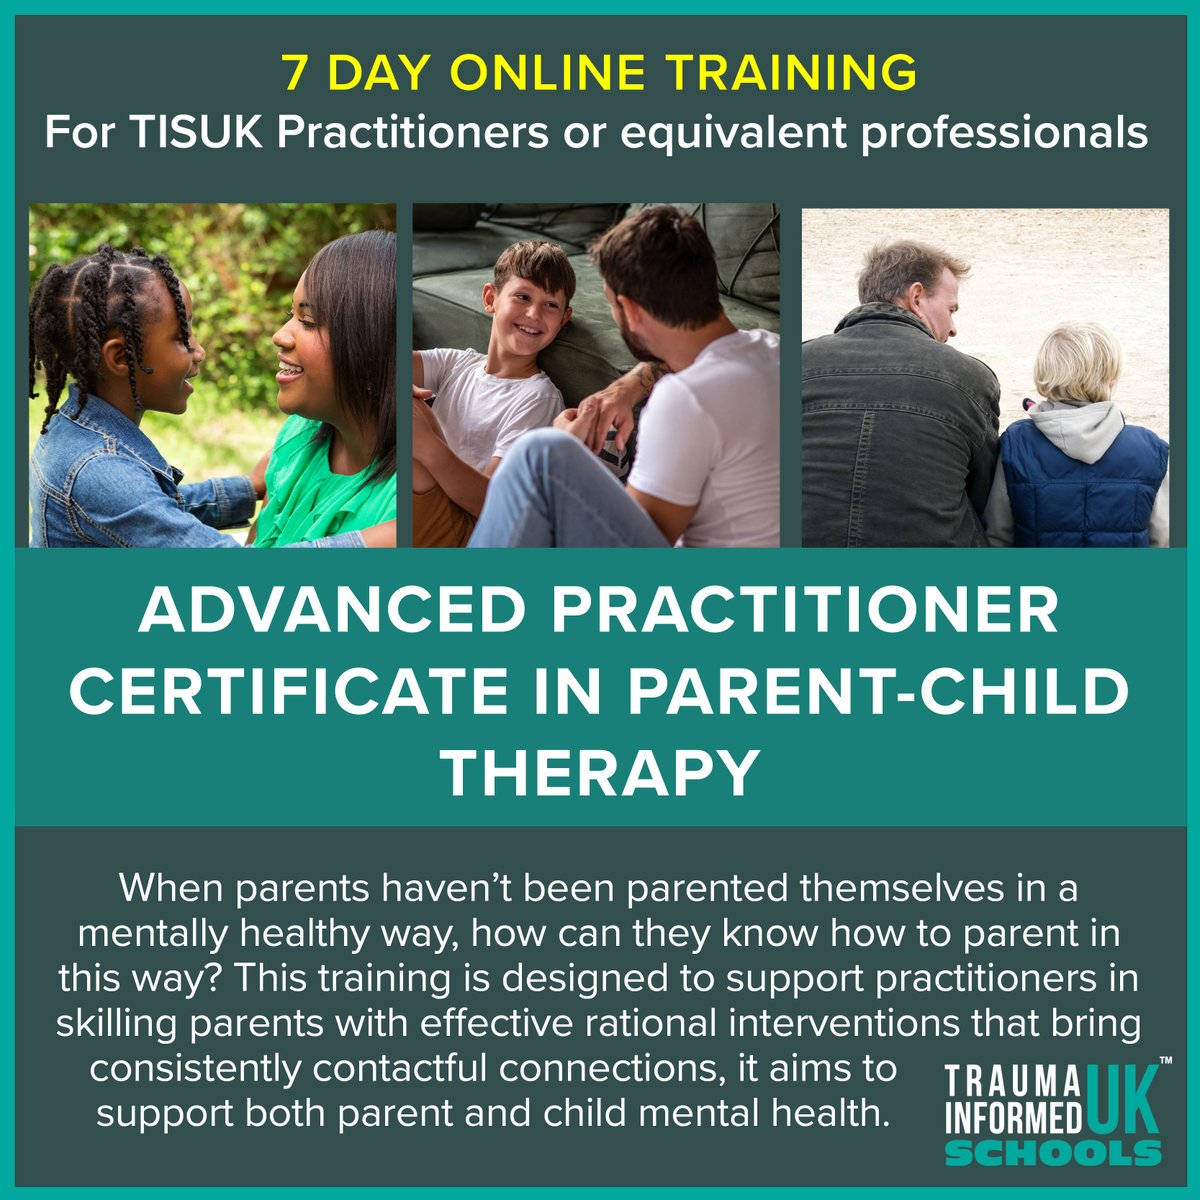 How can parents attune to and engage with children at different developmental stages? How can they shift from stress inducing to stress reducing interactions? Find out more here- ow.ly/Hbk350Rh4cn #MentalHealth #TraumaInformedPractice #TISUK